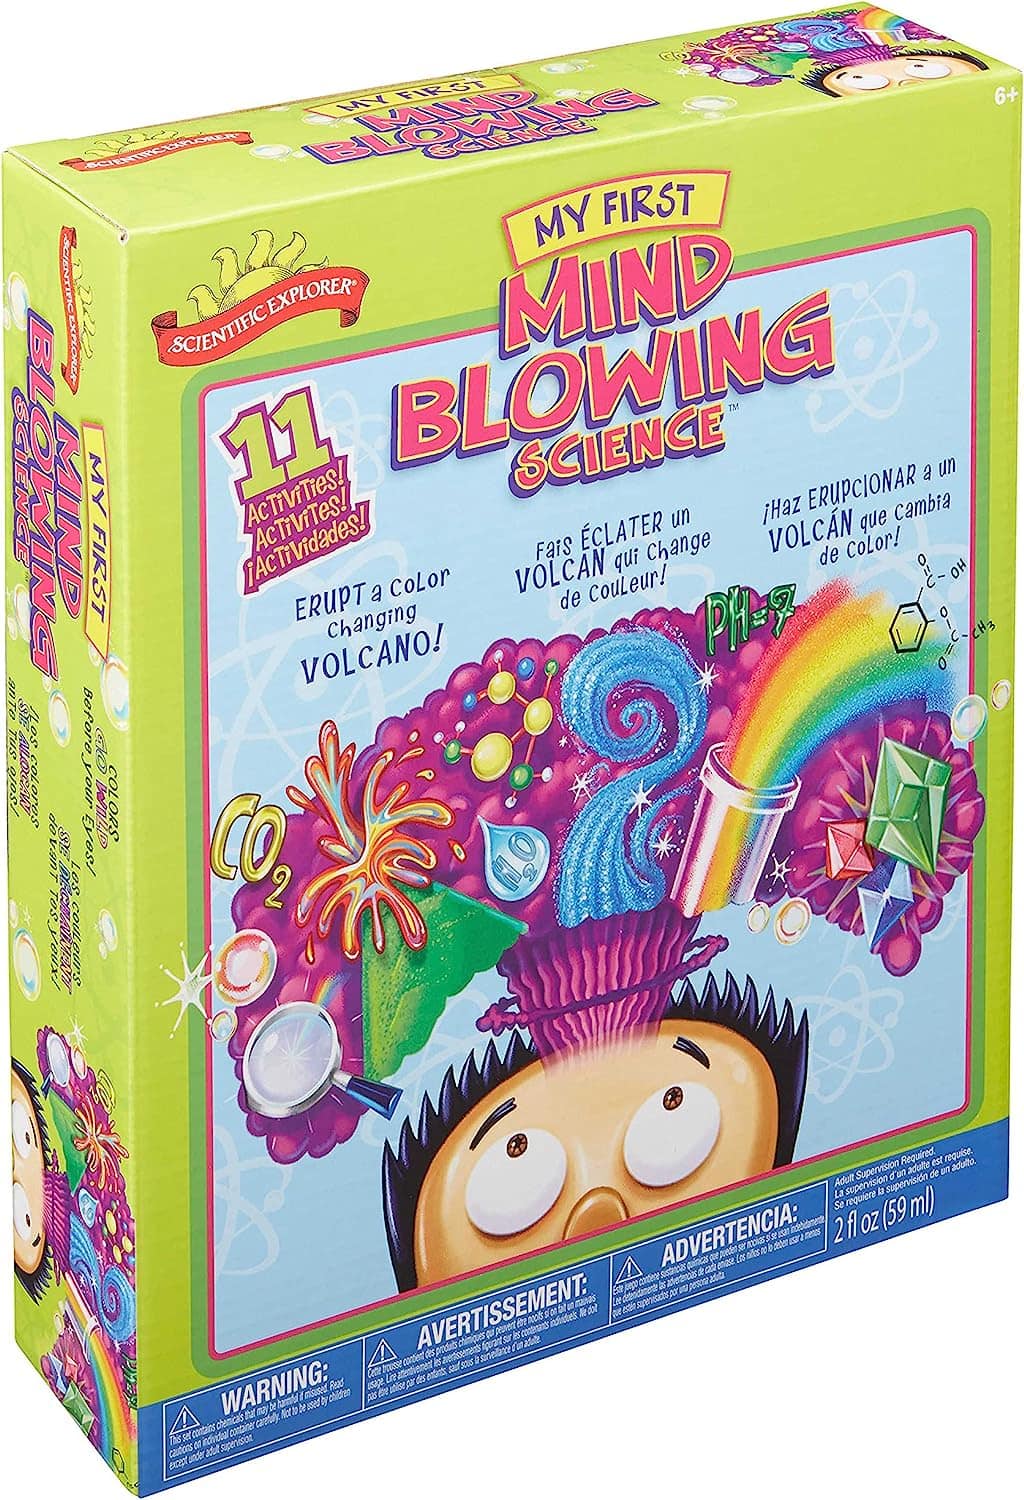 The Scientific Explorer My First Mind Blowing Science Experiment Kit